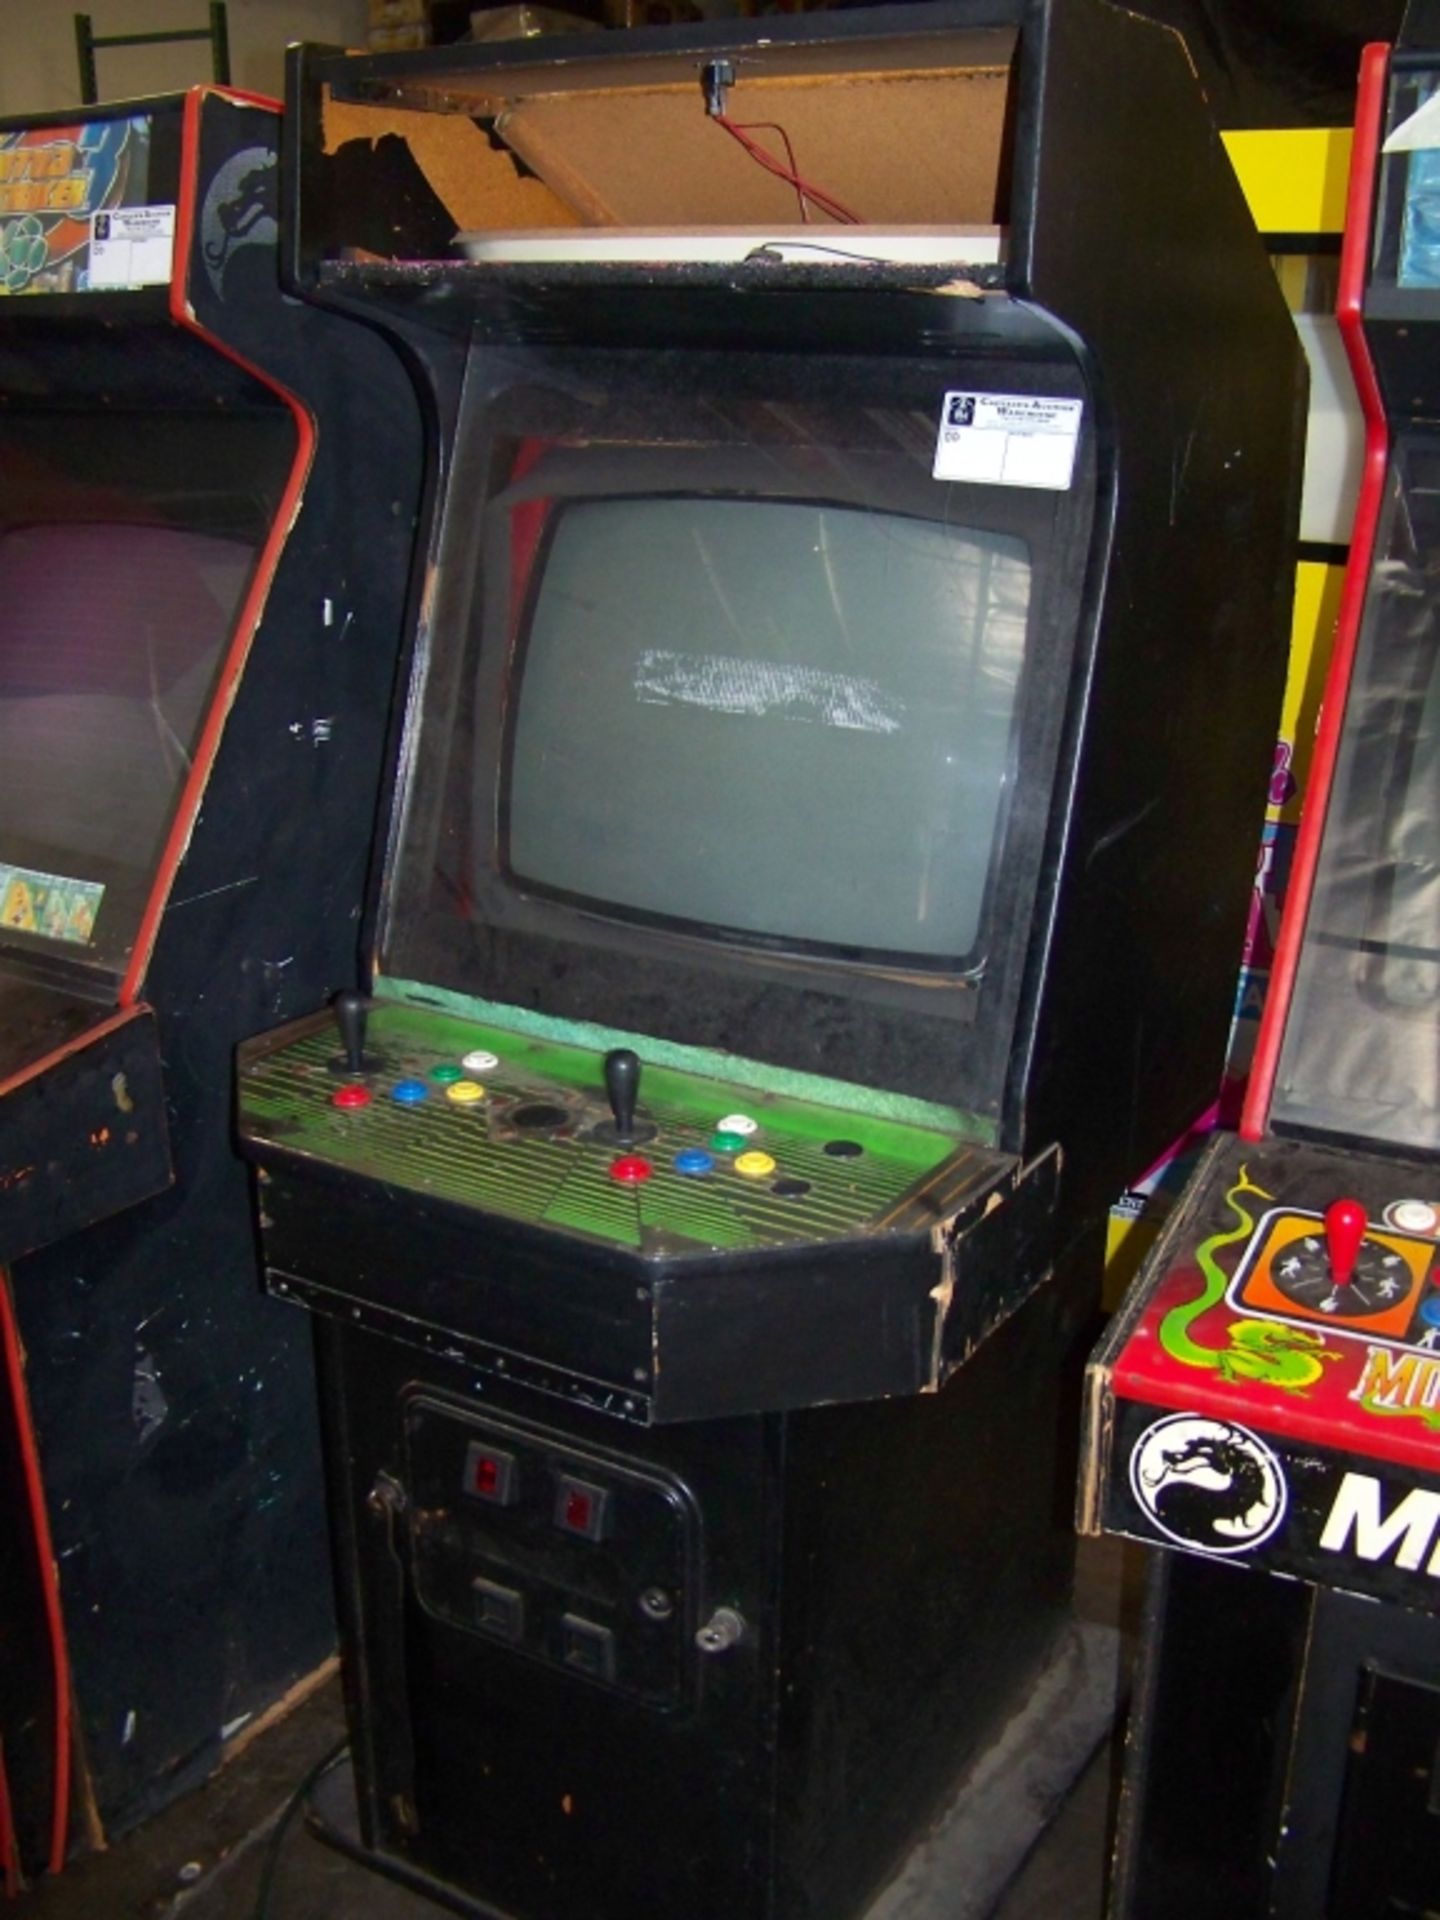 UPRIGHT ARCADE GAME CABINET